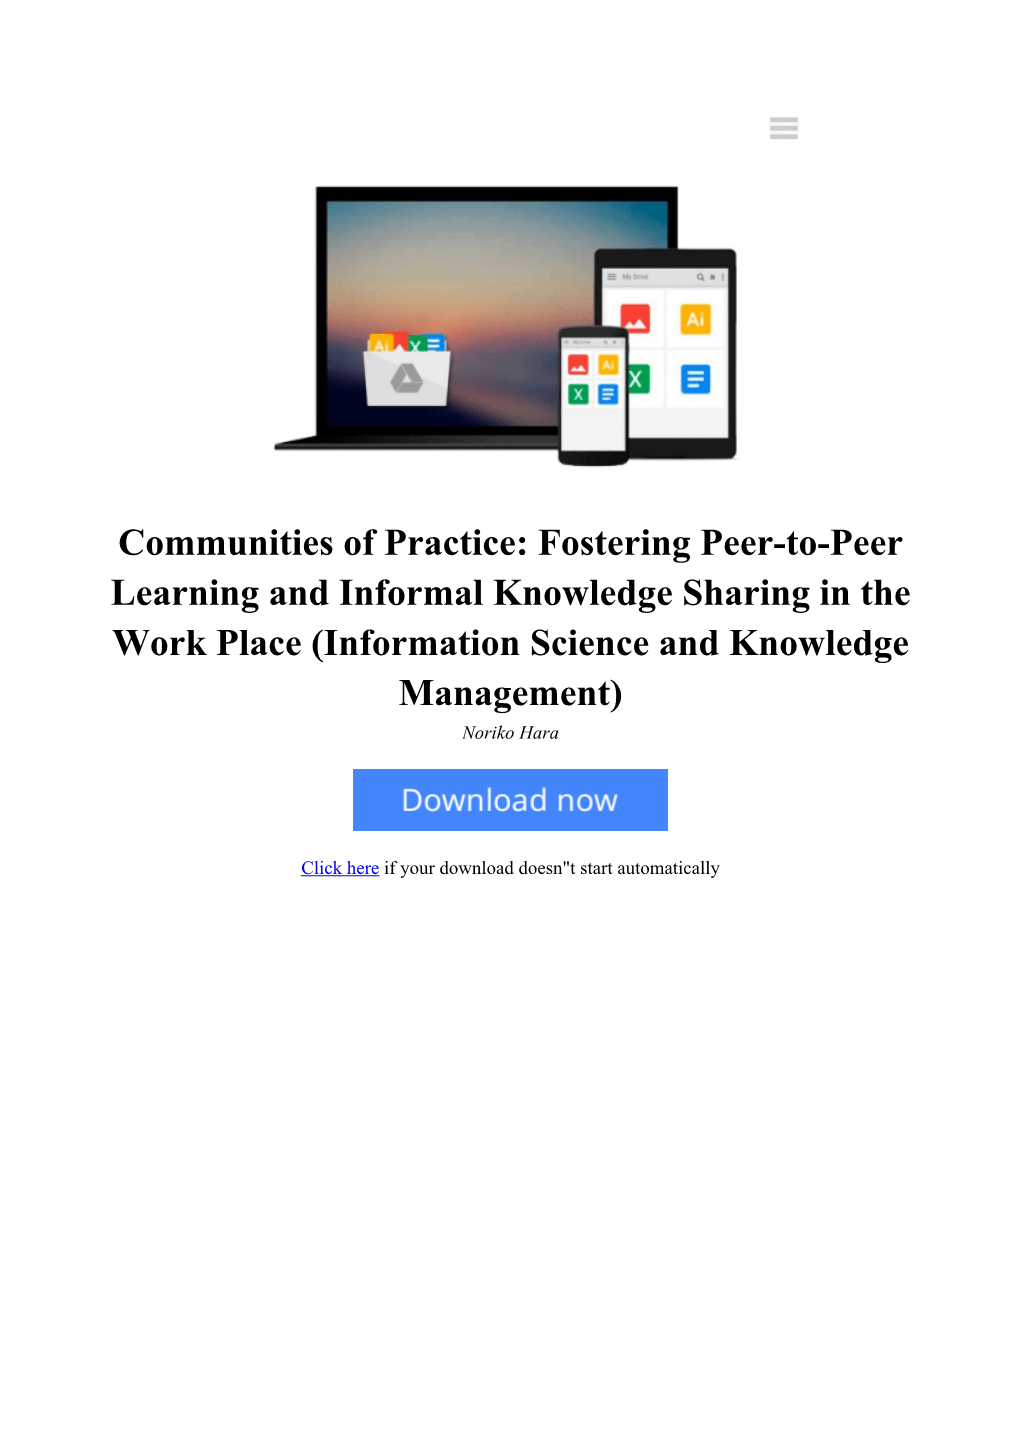 Fostering Peer-To-Peer Learning and Informal Knowledge Sharing in the Work Place (Information Science and Knowledge Management) Noriko Hara